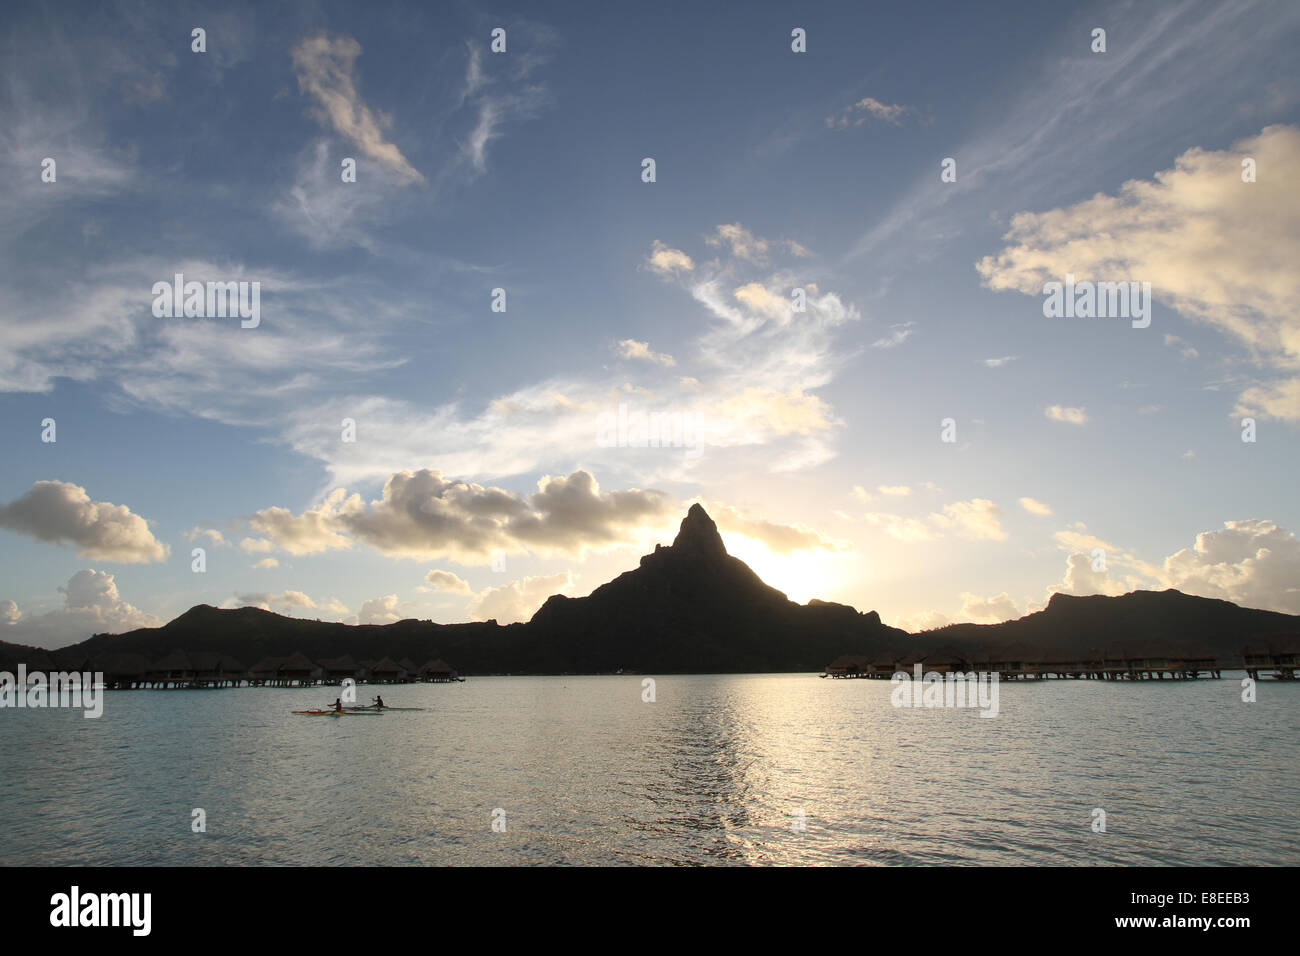 Outrigger at sunset in Bora Bora, French Polynesia with silhouette of mountain behind Stock Photo